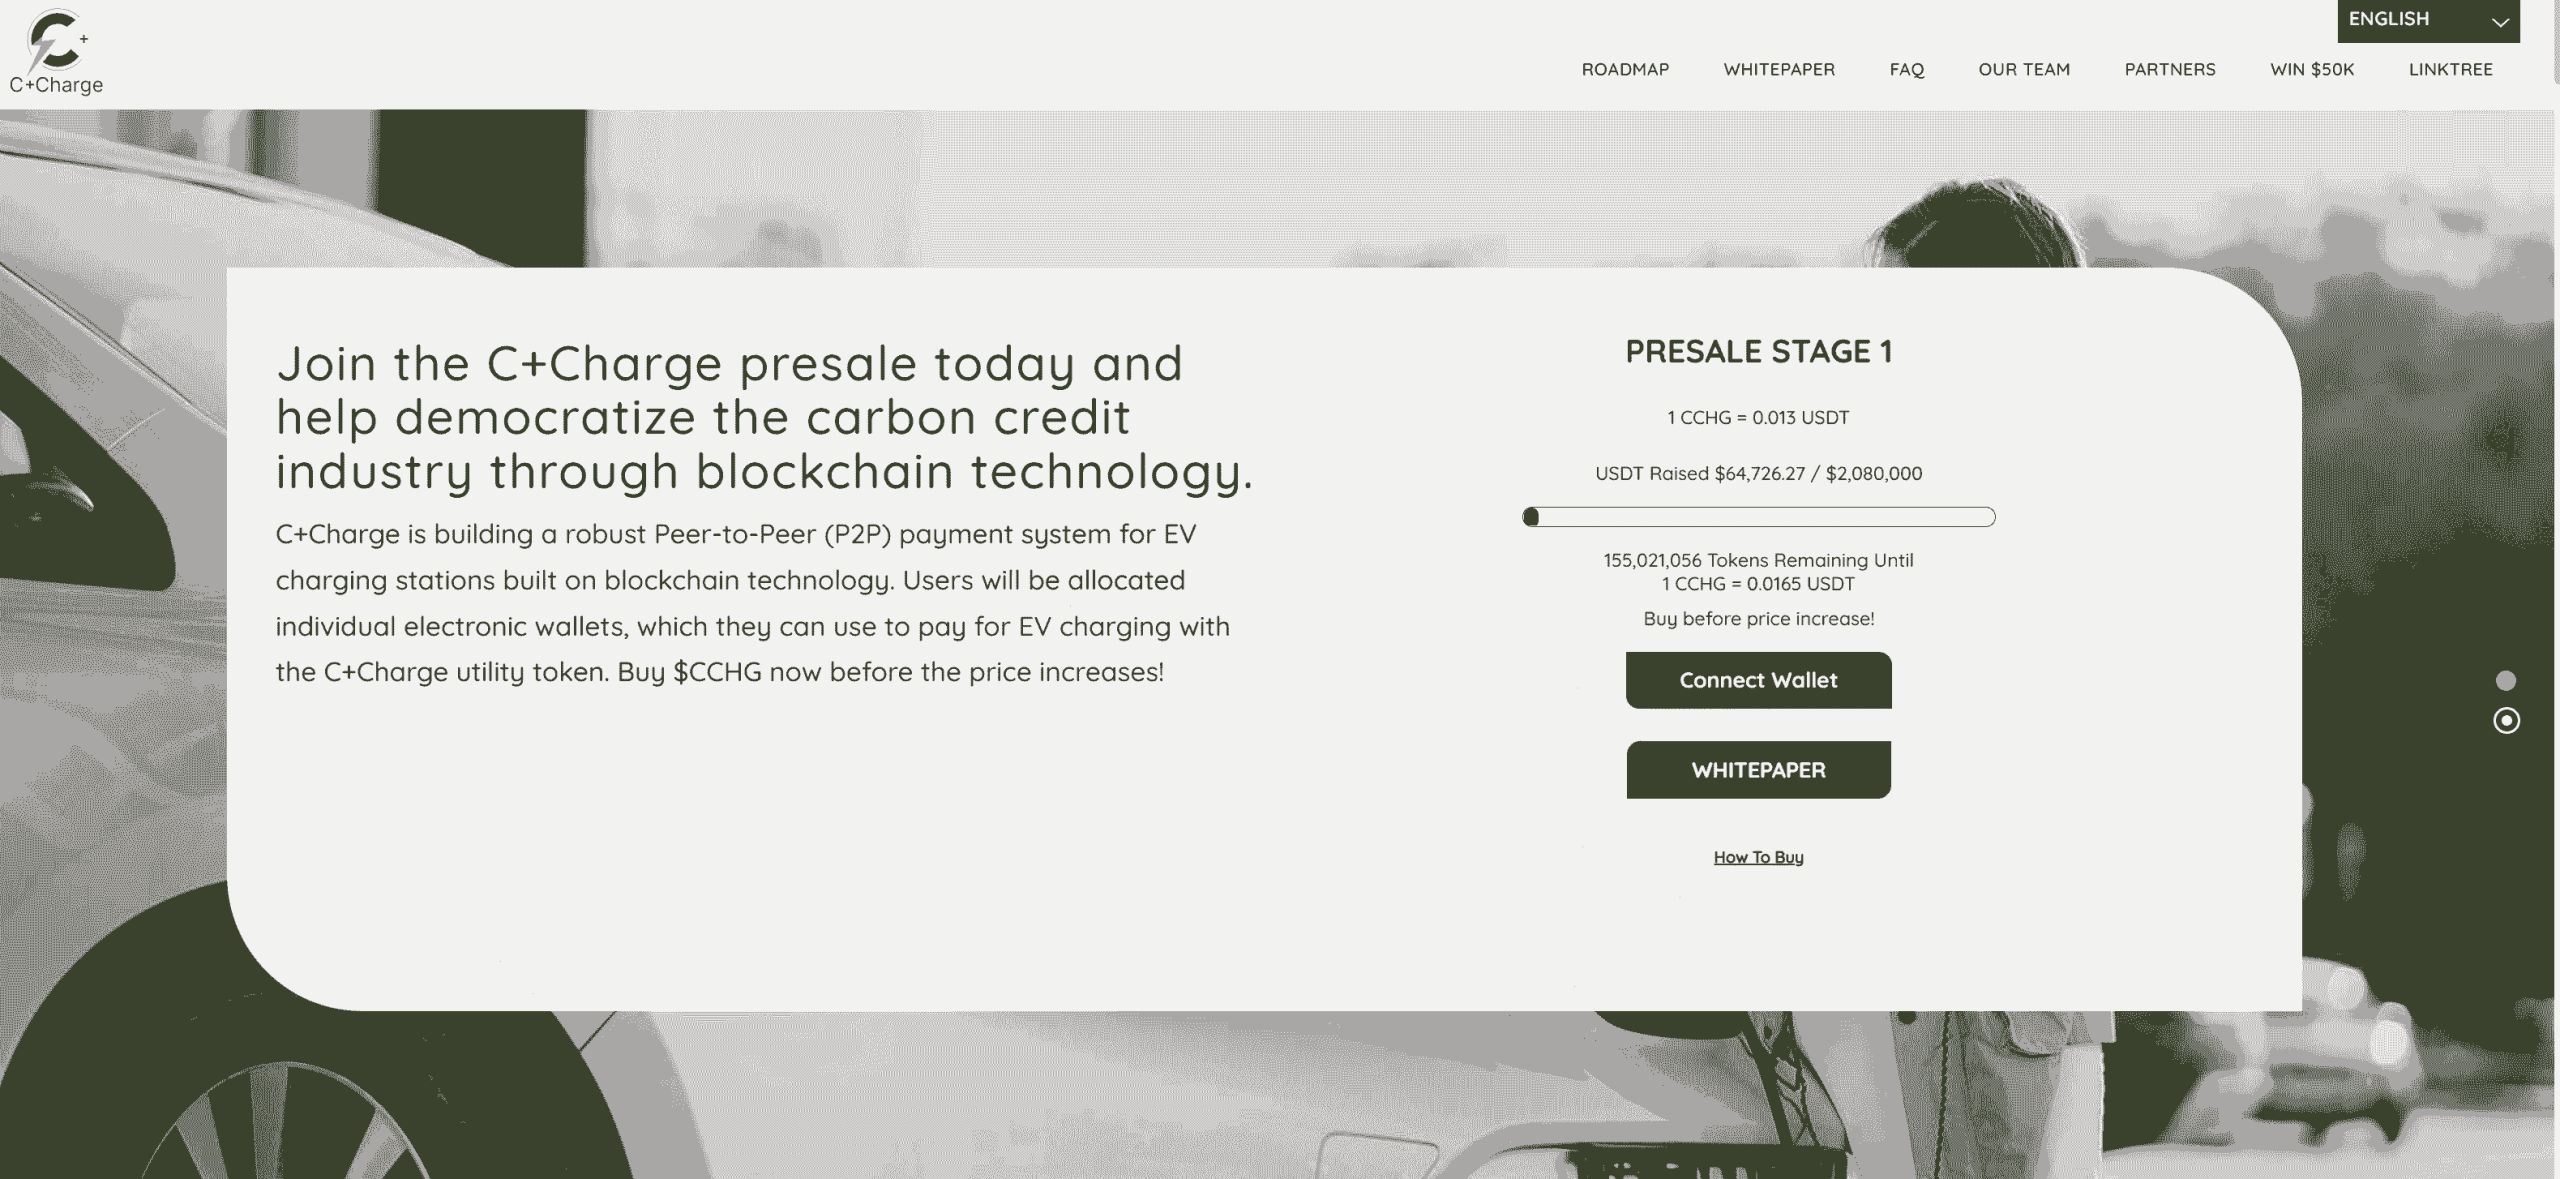 C+Charge Presale Page